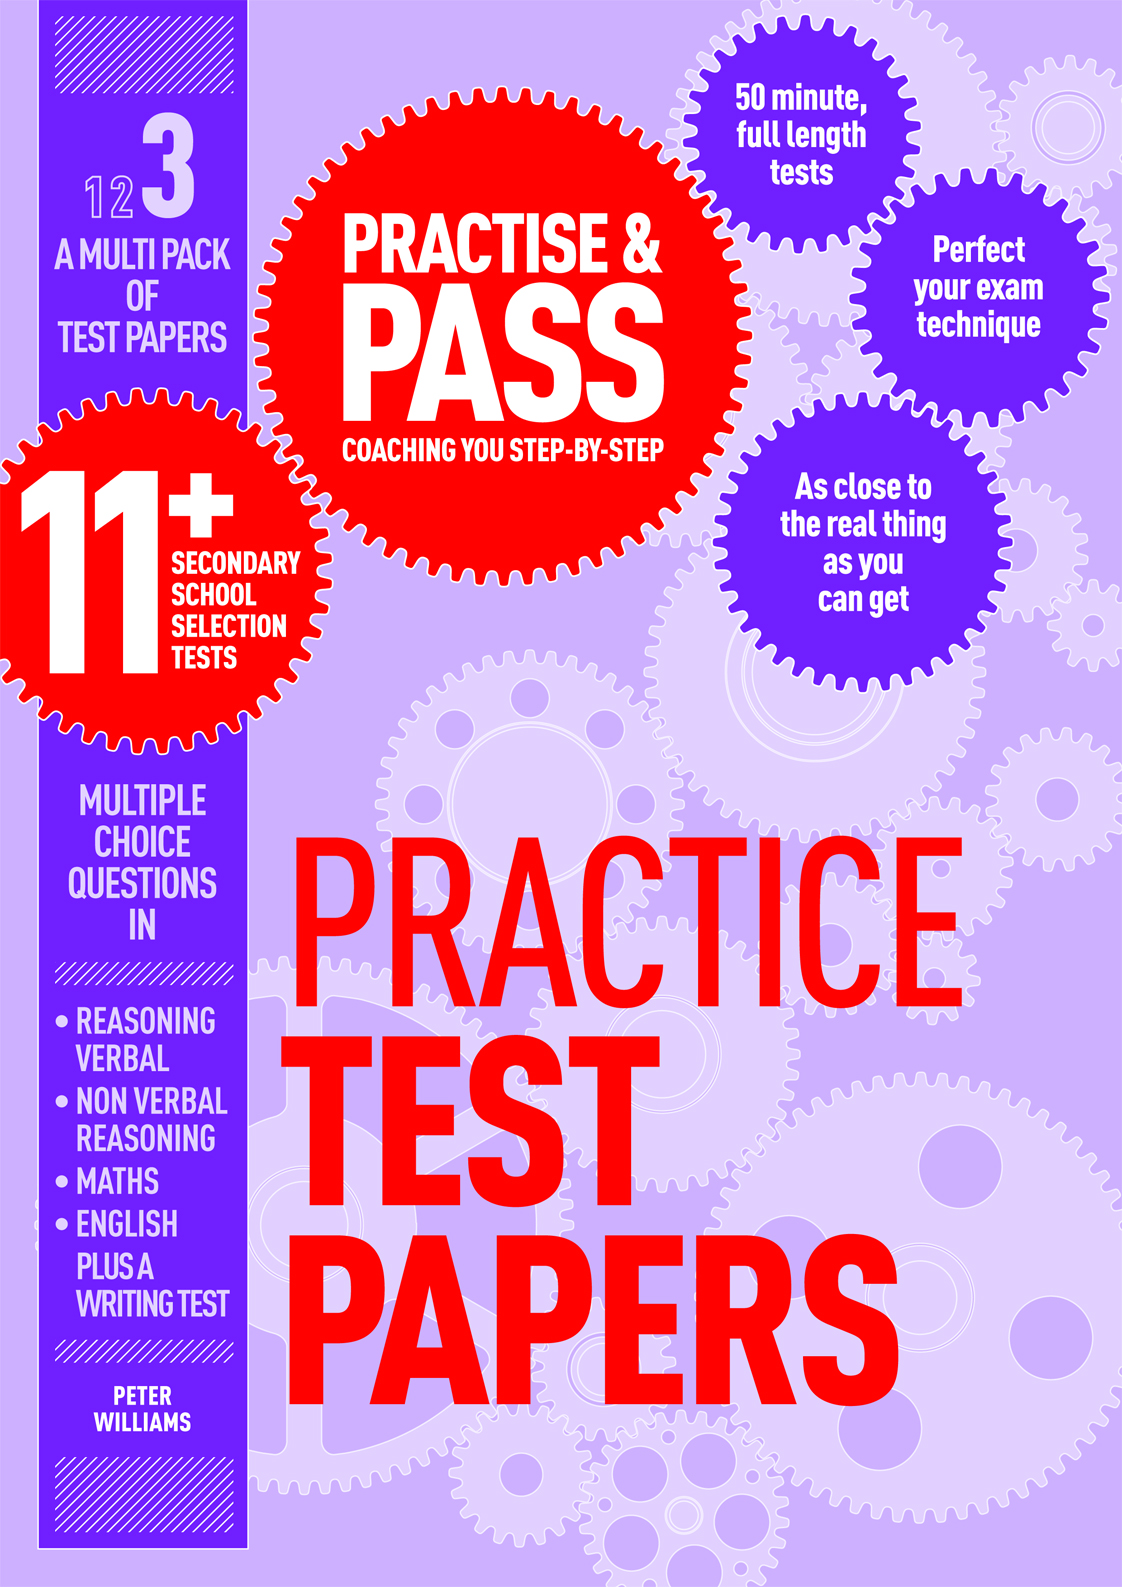 Test papers 11+